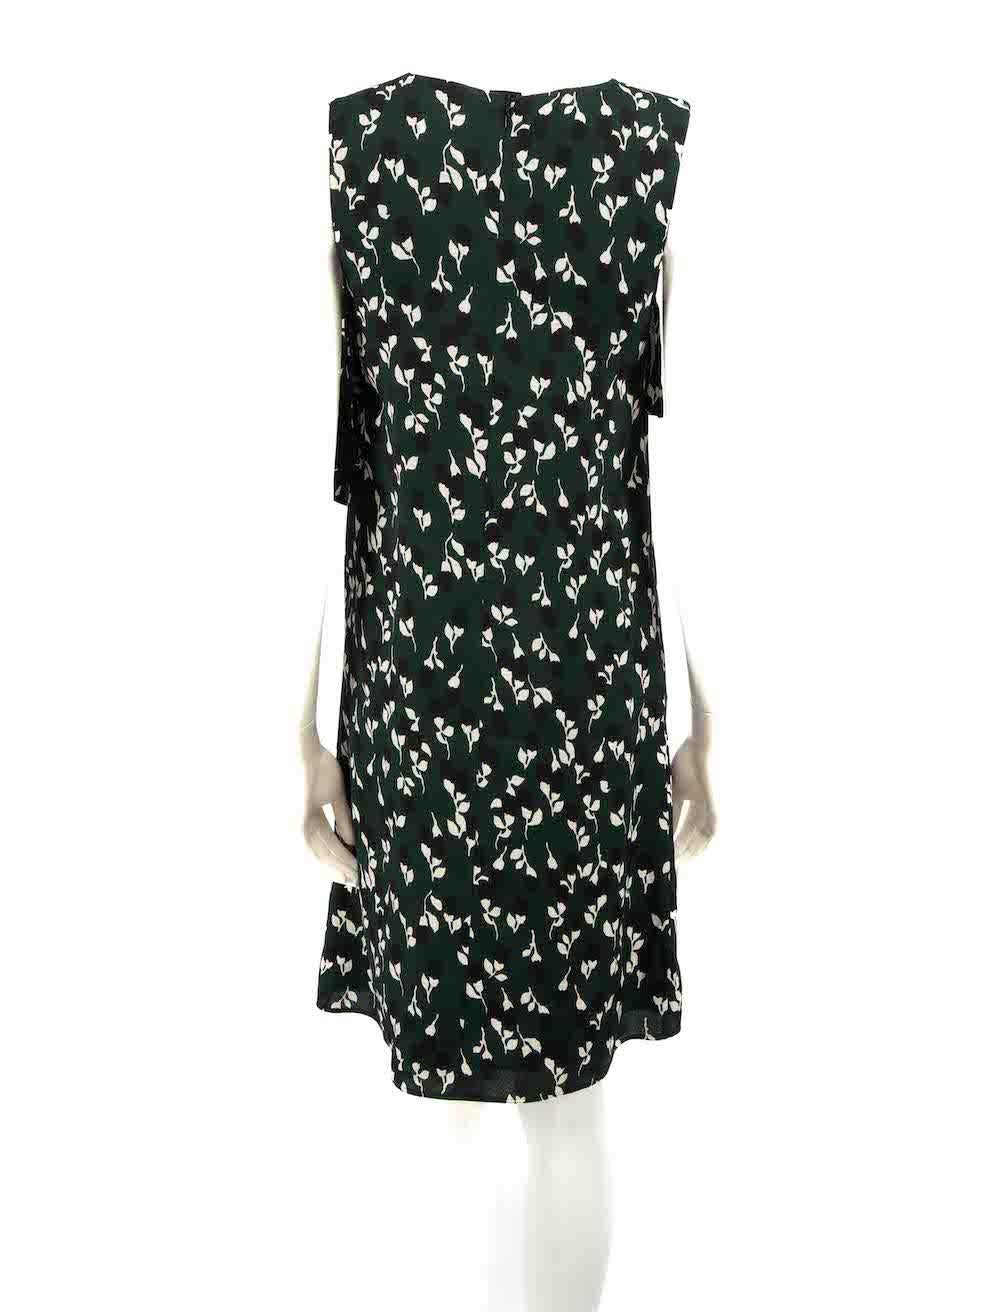 Marni Green Floral Print Knee Length Dress Size XS In Good Condition For Sale In London, GB